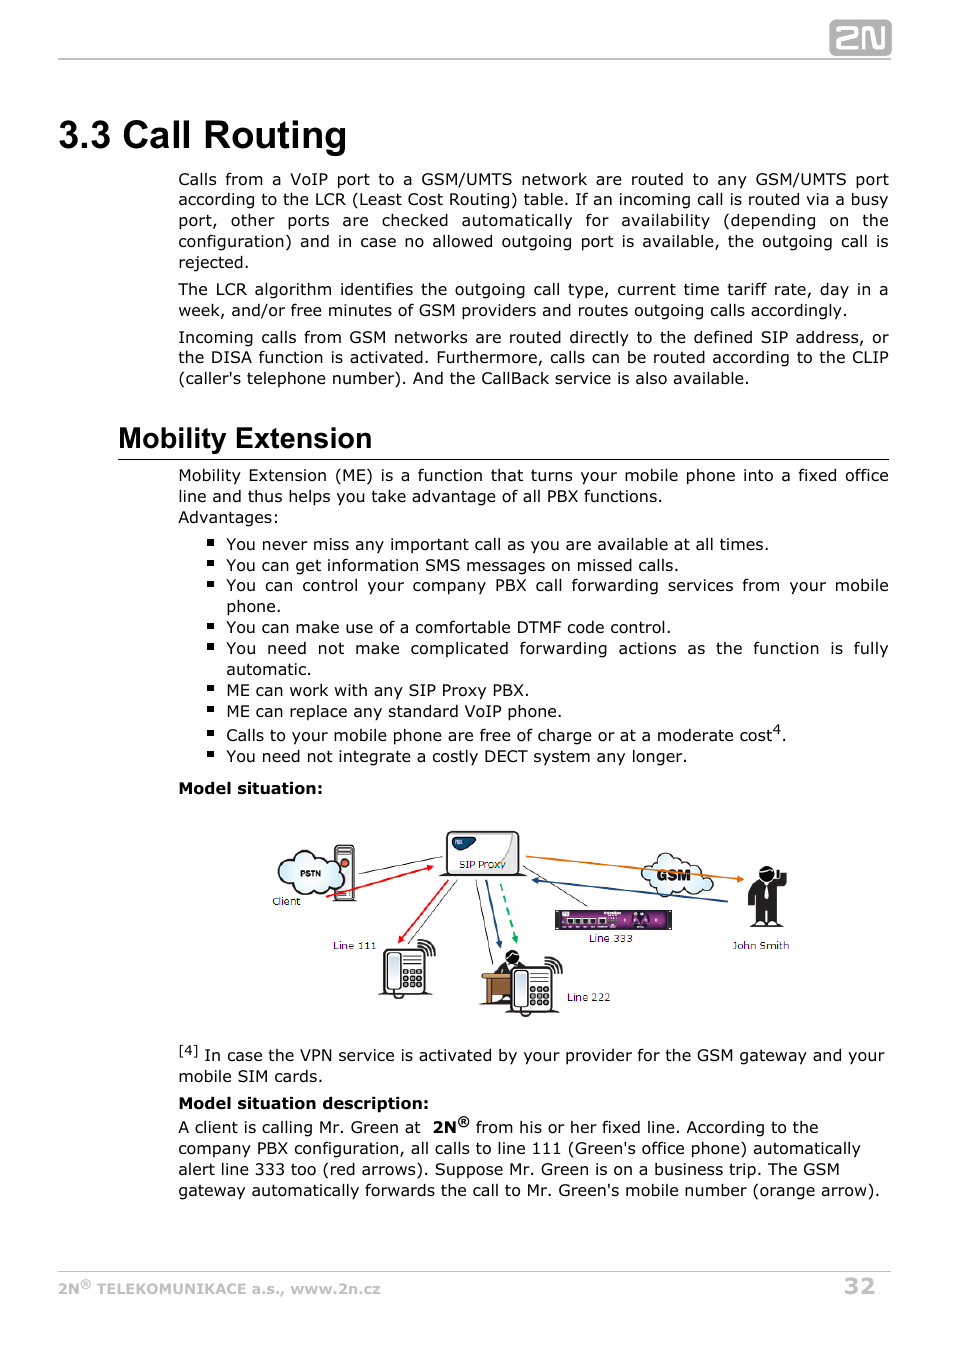 3 call routing, Mobility extension | 2N VoiceBlue MAX v1.2 User Manual | Page 32 / 111